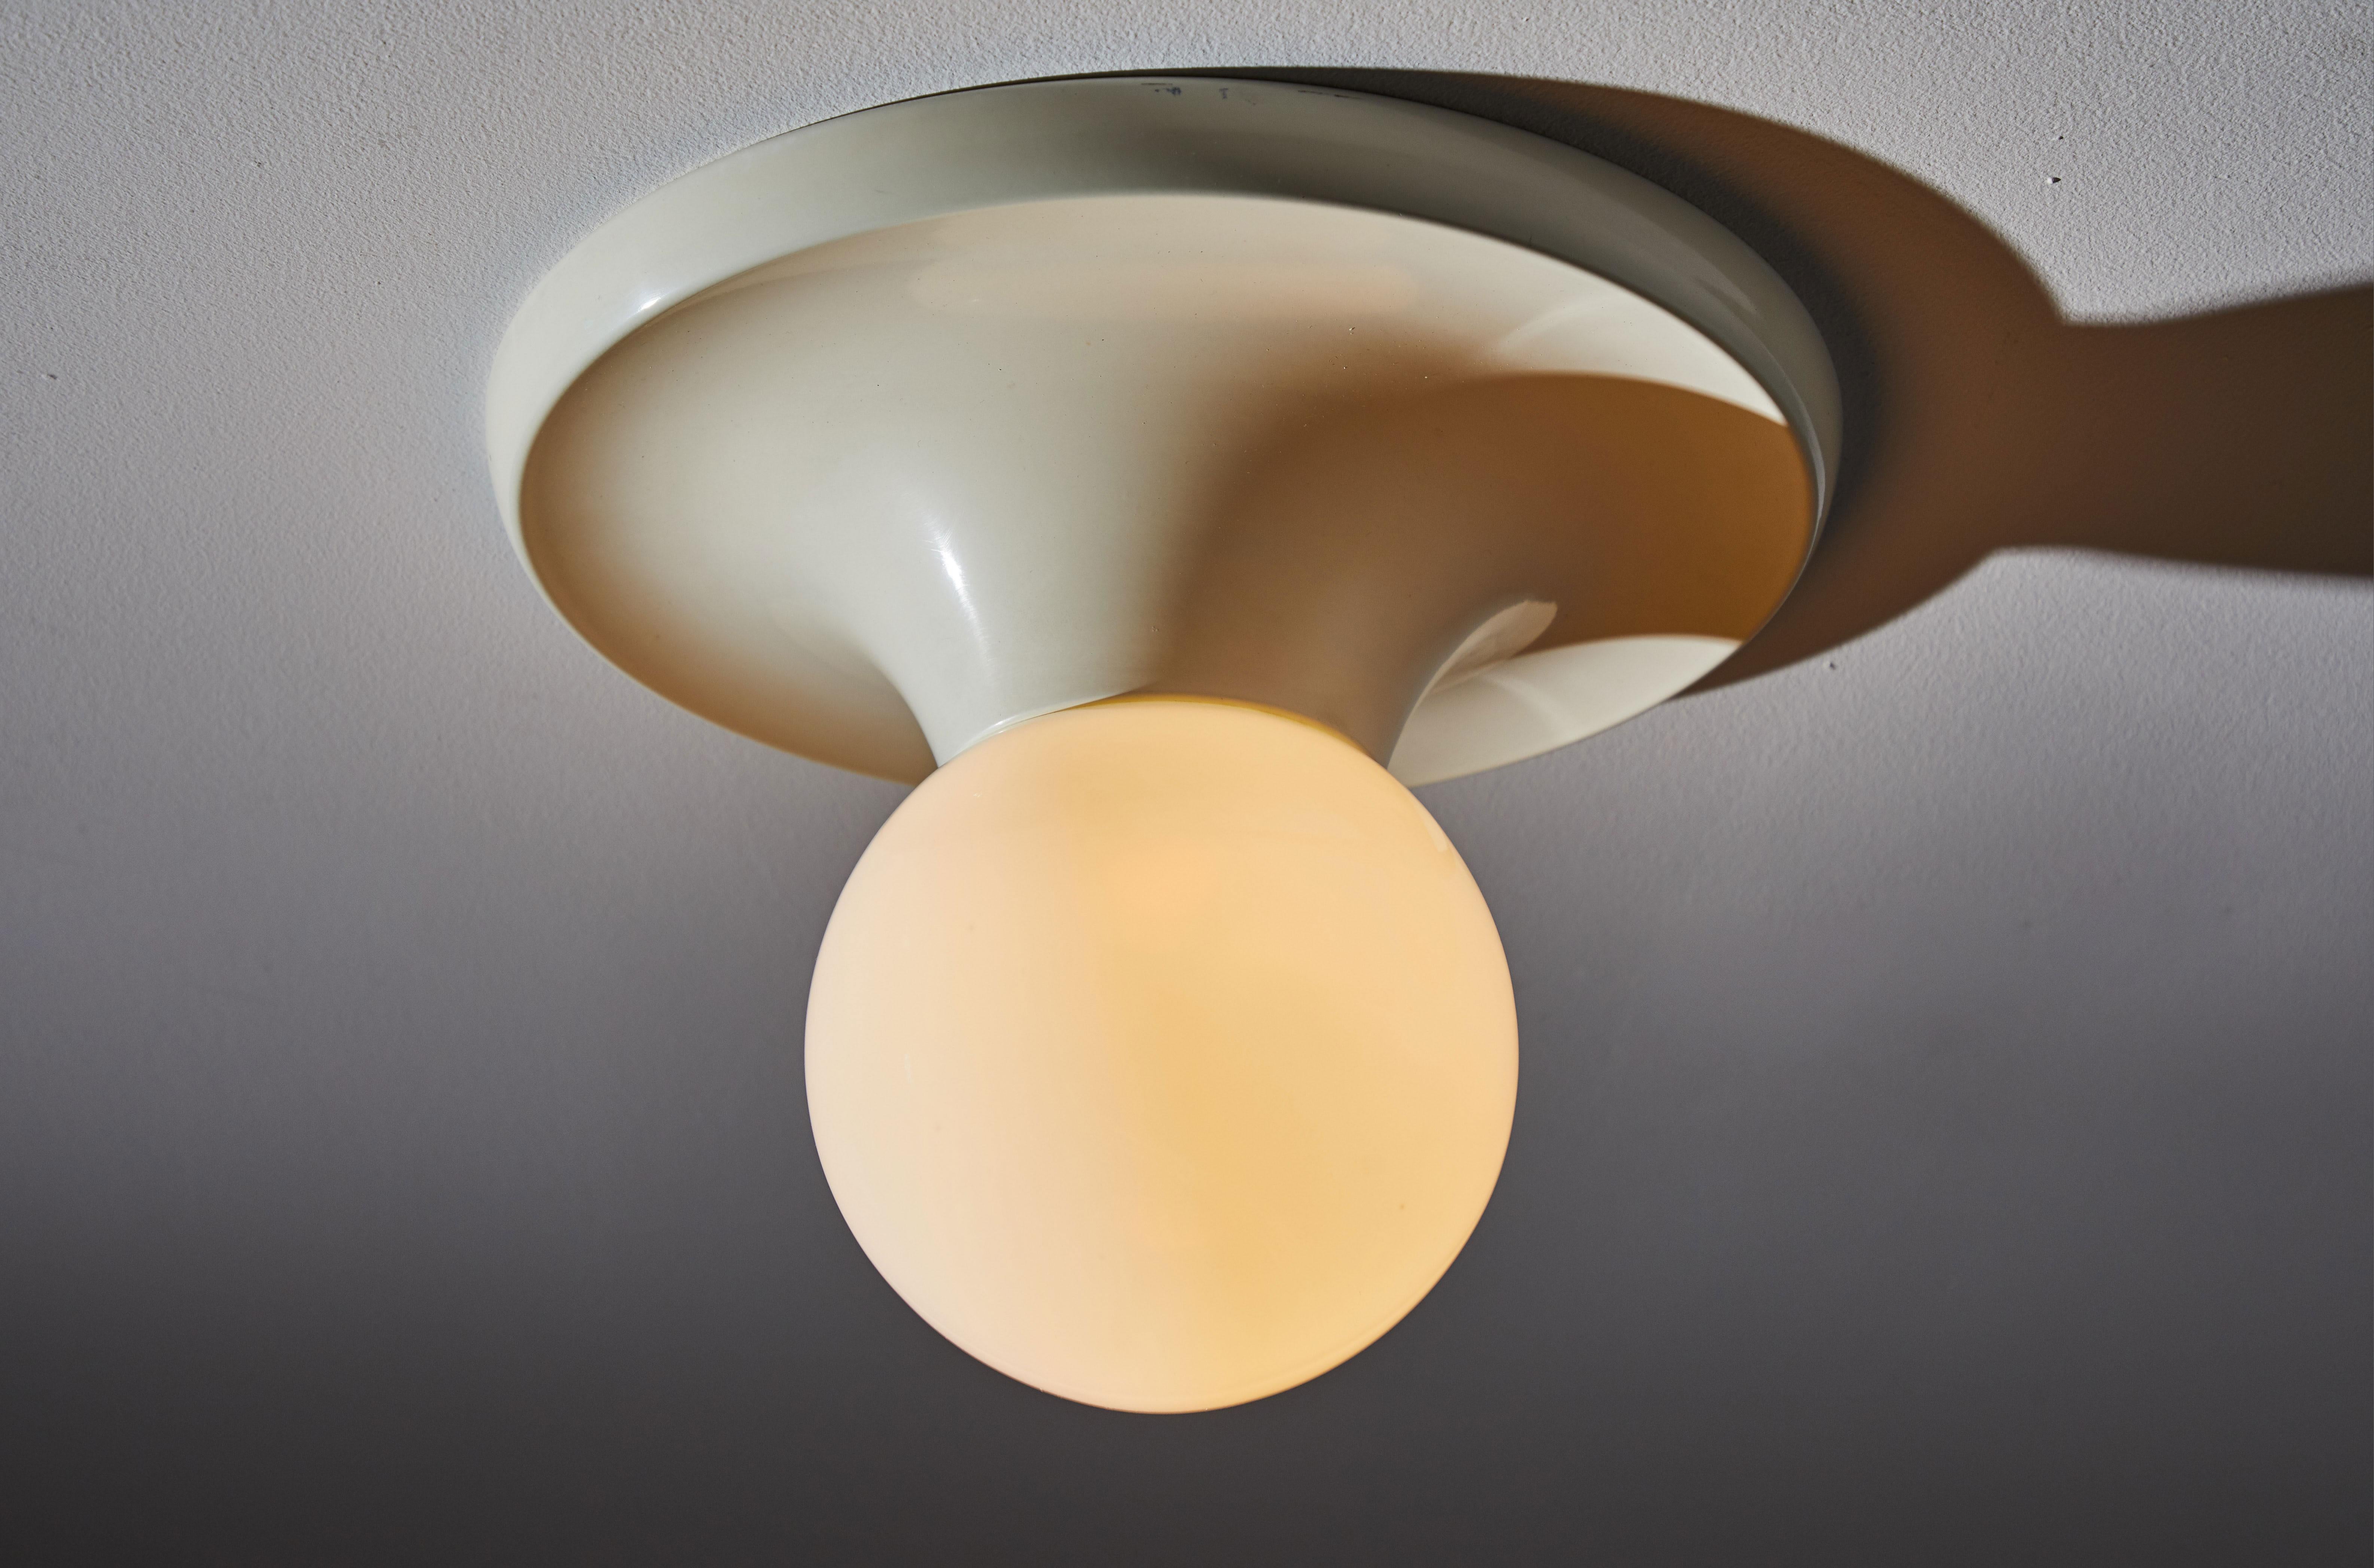 Two ceiling lights by Achille Castiglioni. Designed and manufactured in Italy for Flos, circa 1960s. Enameled metal and opaline glass. Rewired for US junction boxes. Each light takes one E26 75w maximum bulb. Priced and sold individually.